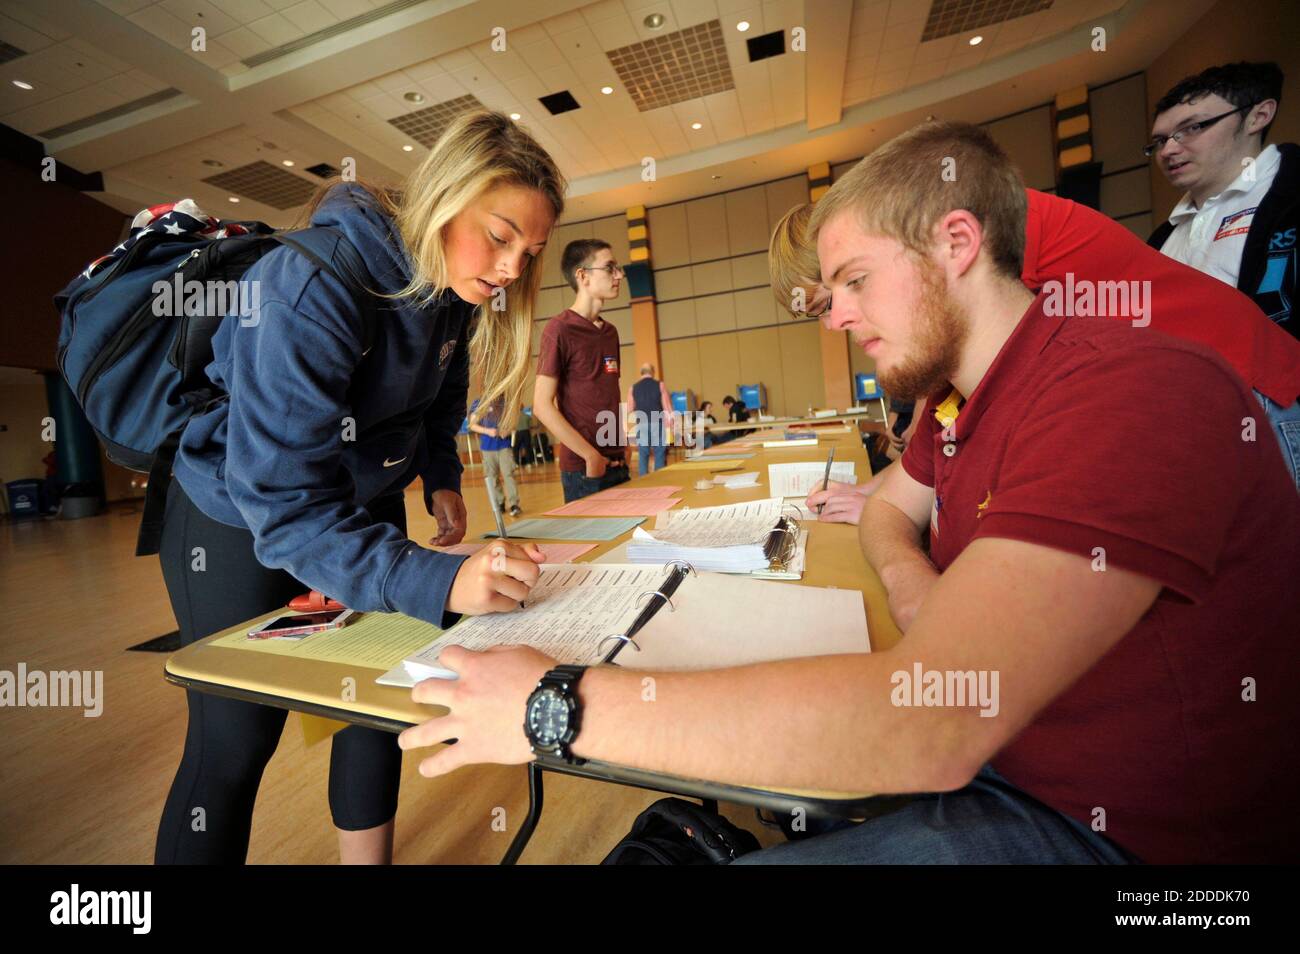 NO FILM, NO VIDEO, NO TV, NO DOCUMENTARY - Election official Britt Munnell checks in Penn State student Emilee Ehret before she votes in the HUB building in University Park, Pa., on Tuesday, November 4, 2014. Photo by Nabil K. Mark/Centre Daily Times/MCT/ABACAPRESS.COM Stock Photo